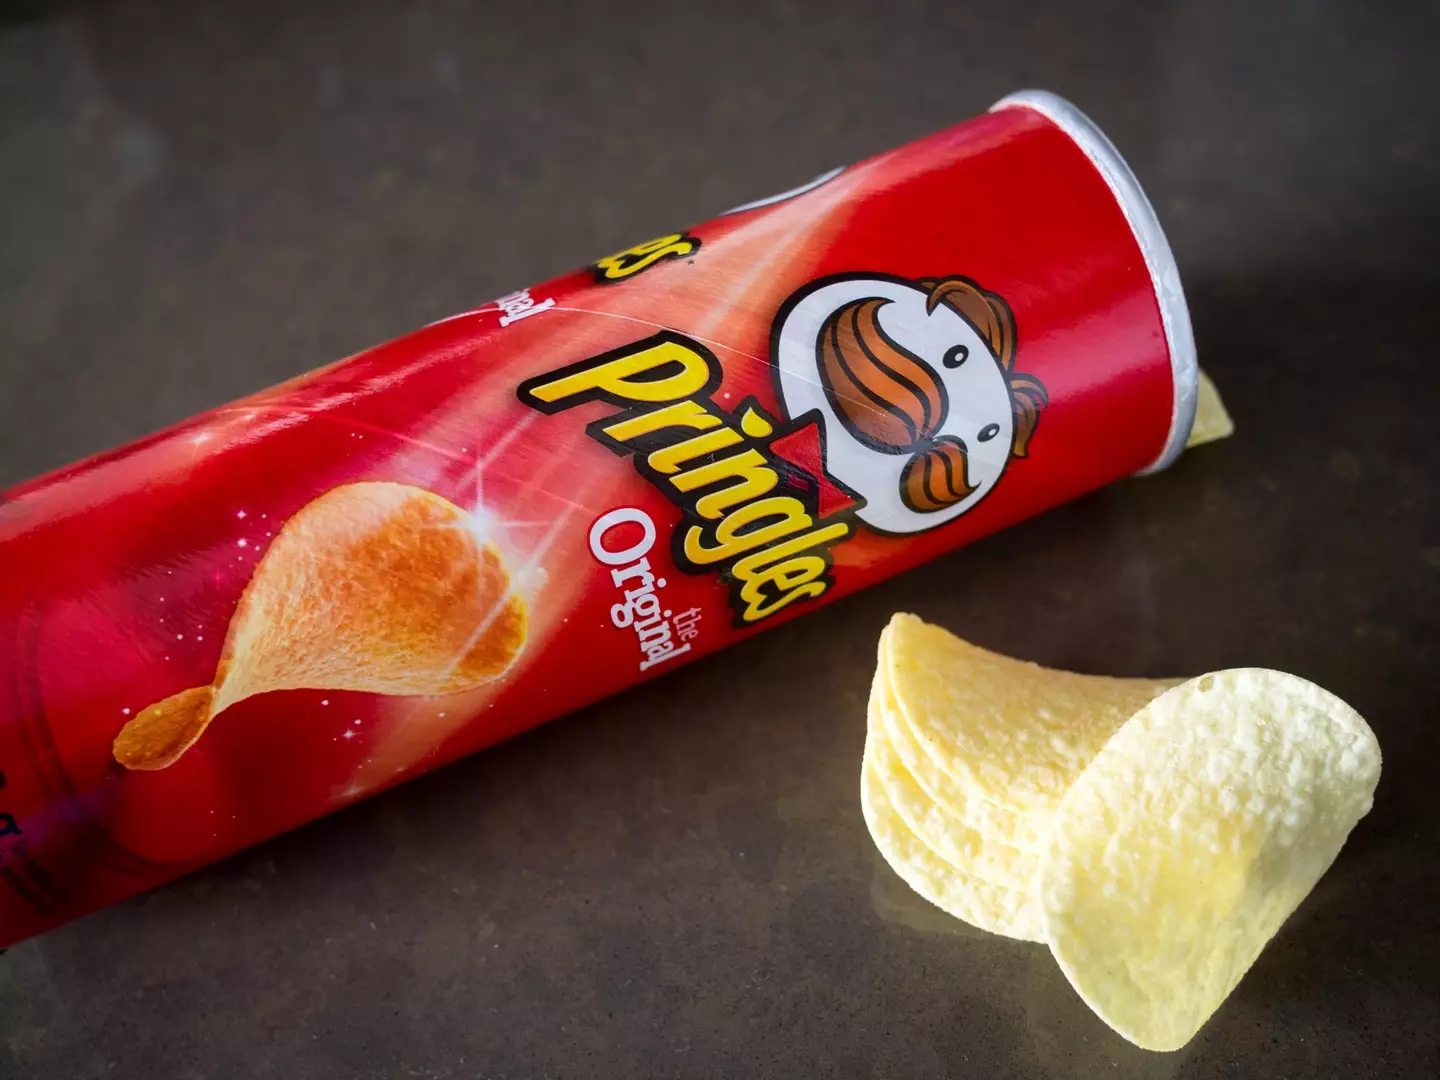 Baur is also credited with the shape of Pringles.